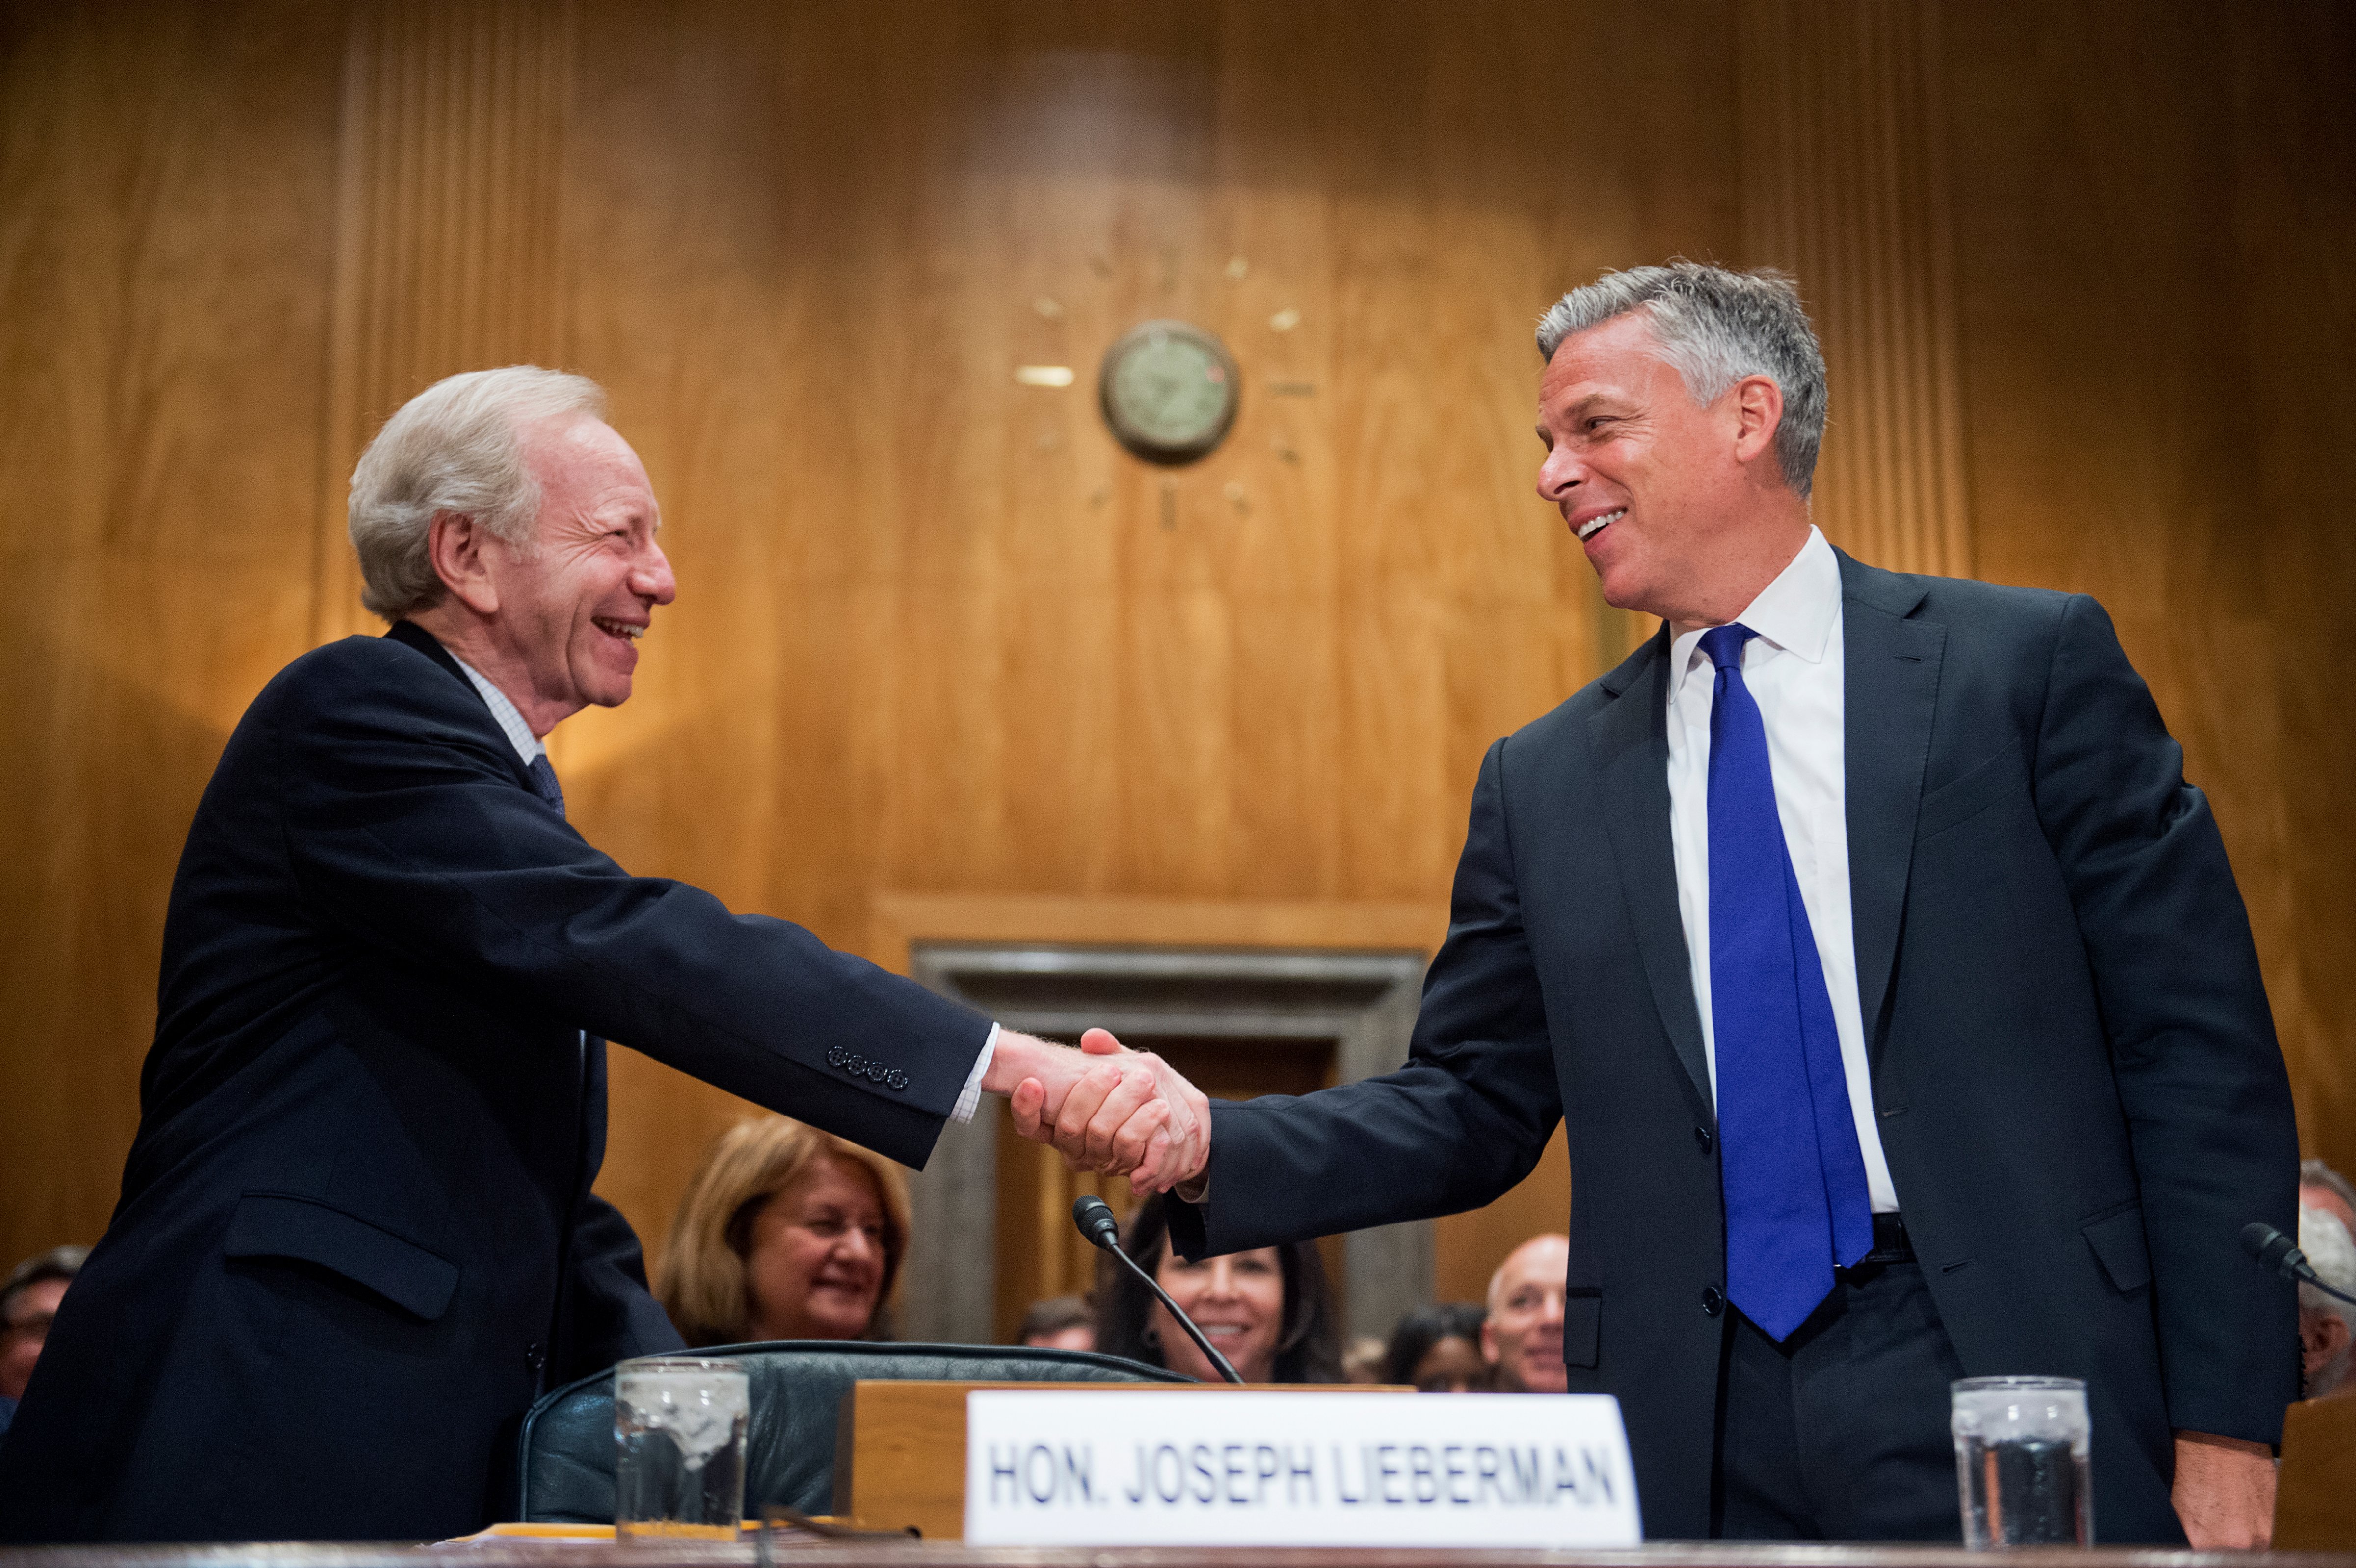 Former Sen. Joseph Lieberman, I-Conn., left, and former Gov. Jon Huntsman Jr., R-Utah, co-chairs of No Labels, arrive for a Senate Homeland Security and Governmental Affairs Committee hearing on June 17, 2015.